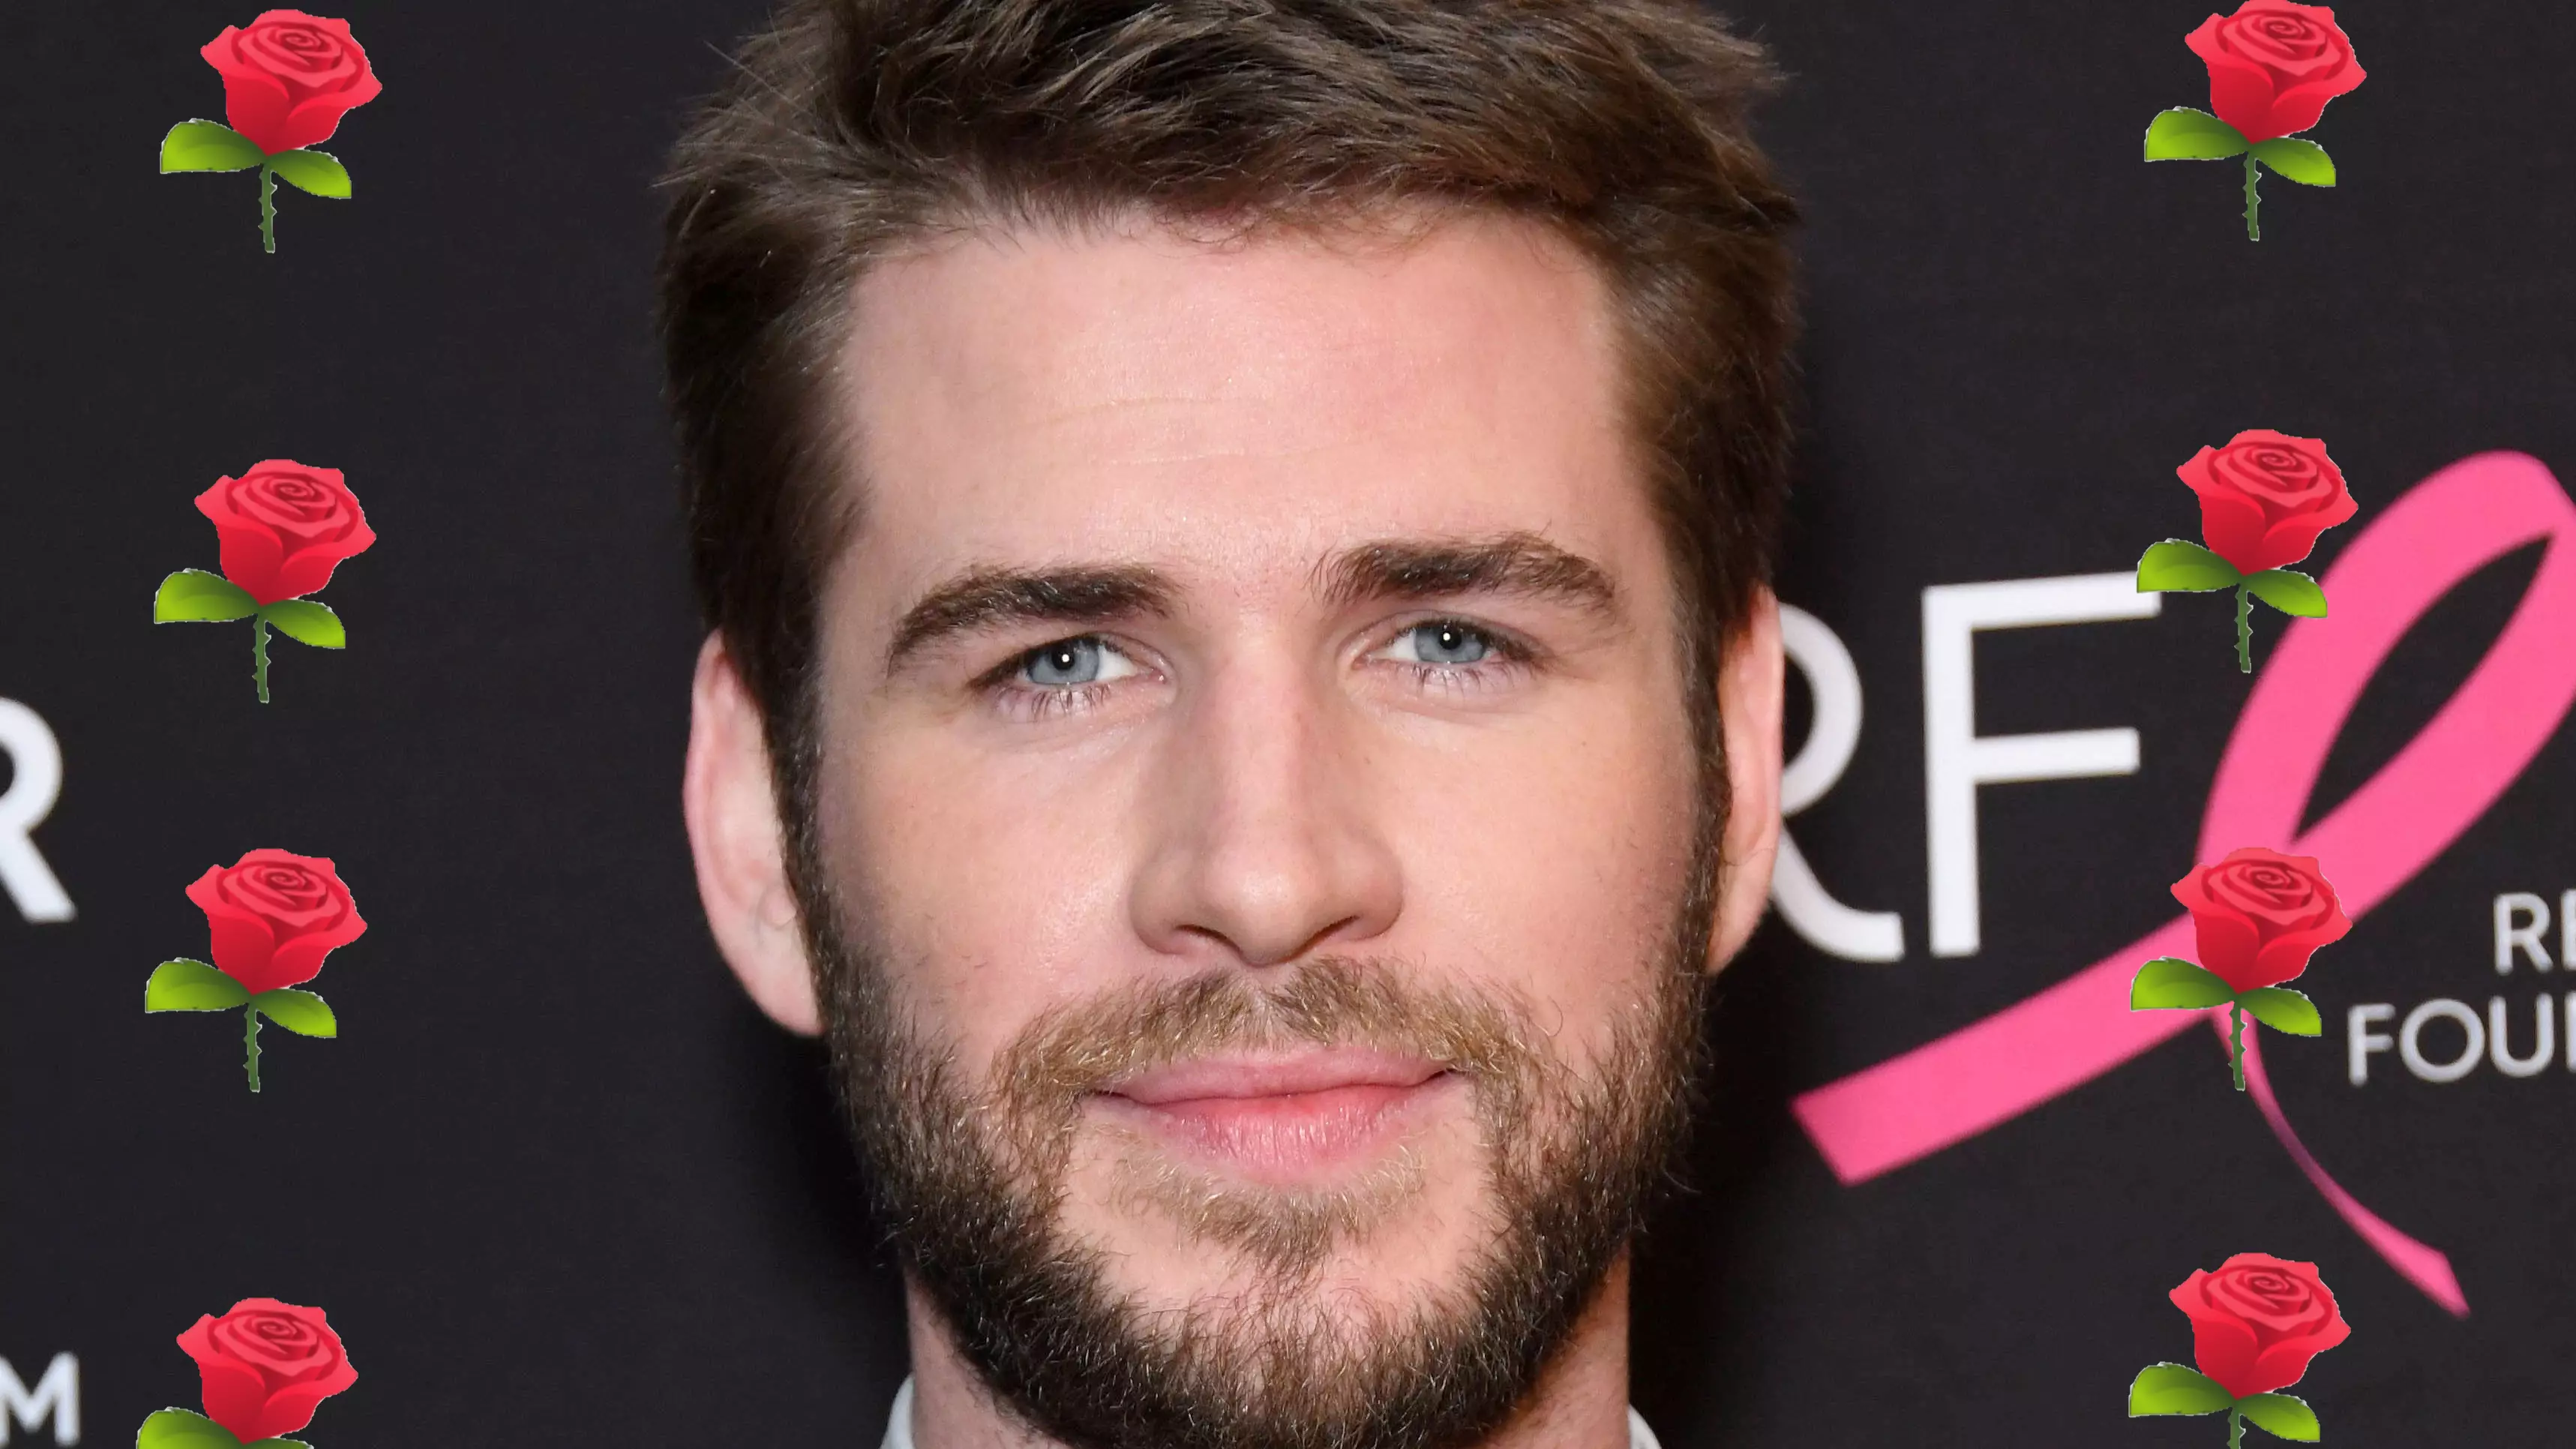 Fans Are Begging For Liam Hemsworth To Become The Next Bachelor